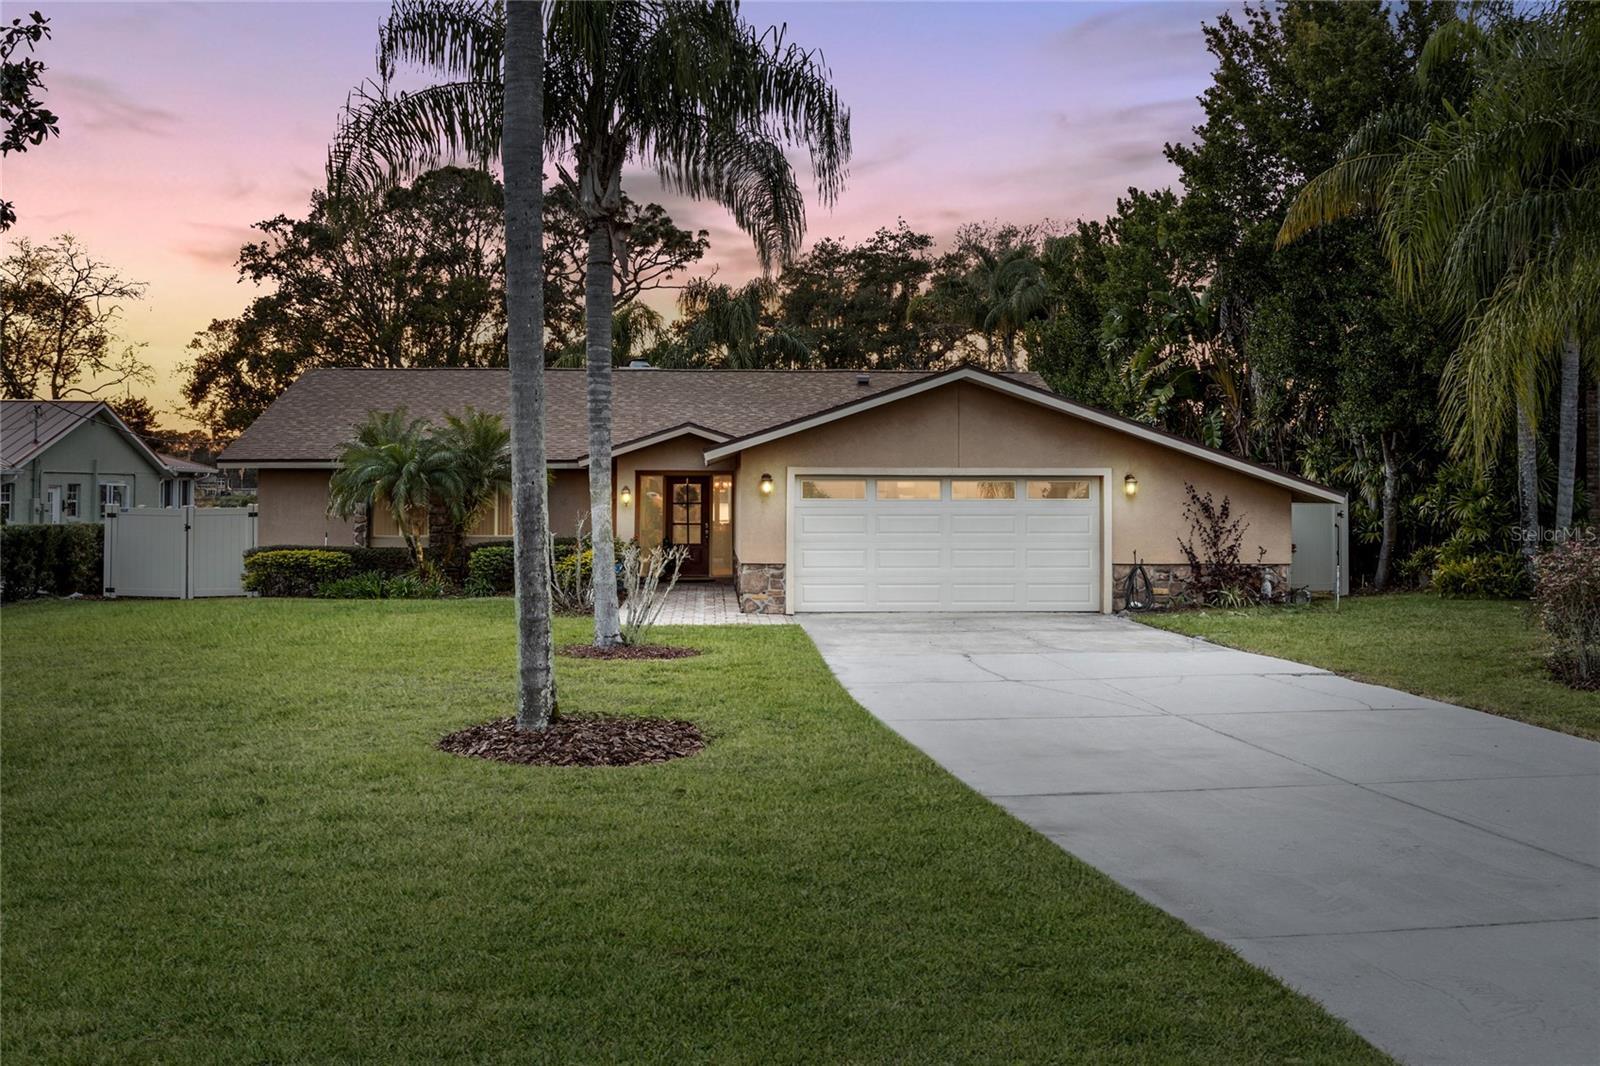 Photo one of 6056 Twin Lakes Dr Oviedo FL 32765 | MLS O6178346